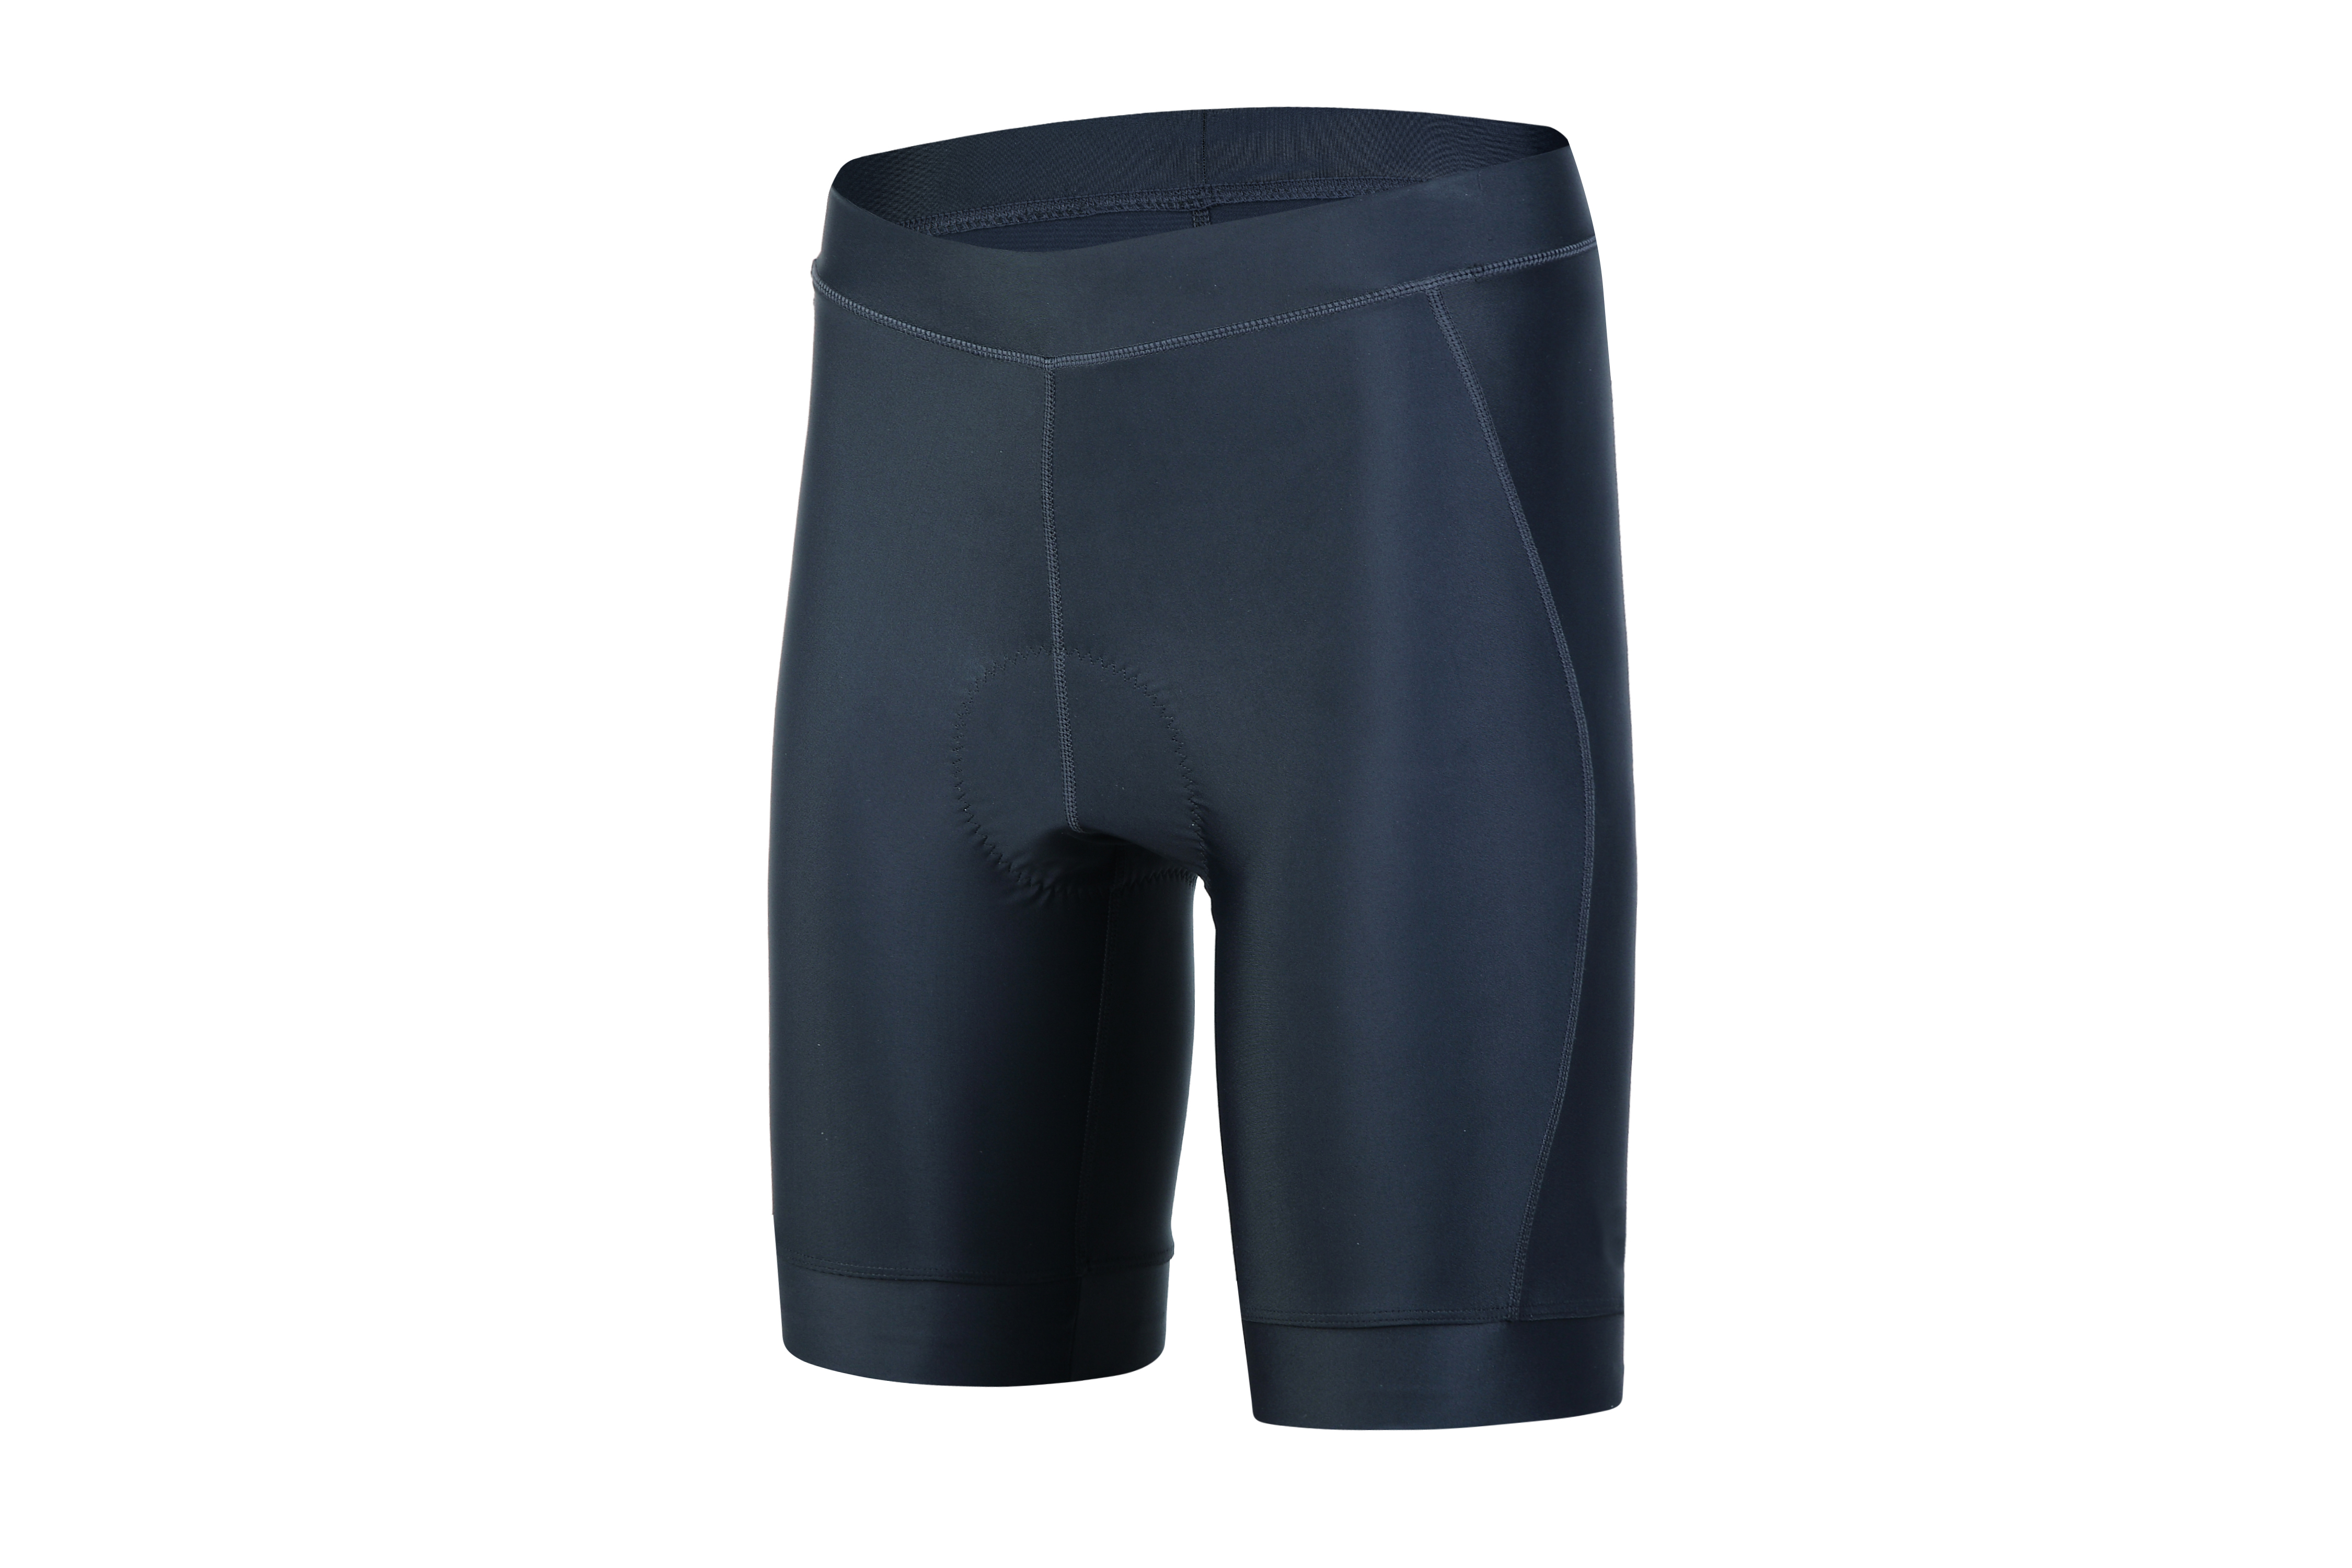 Men’s knitted cycling Shorts.